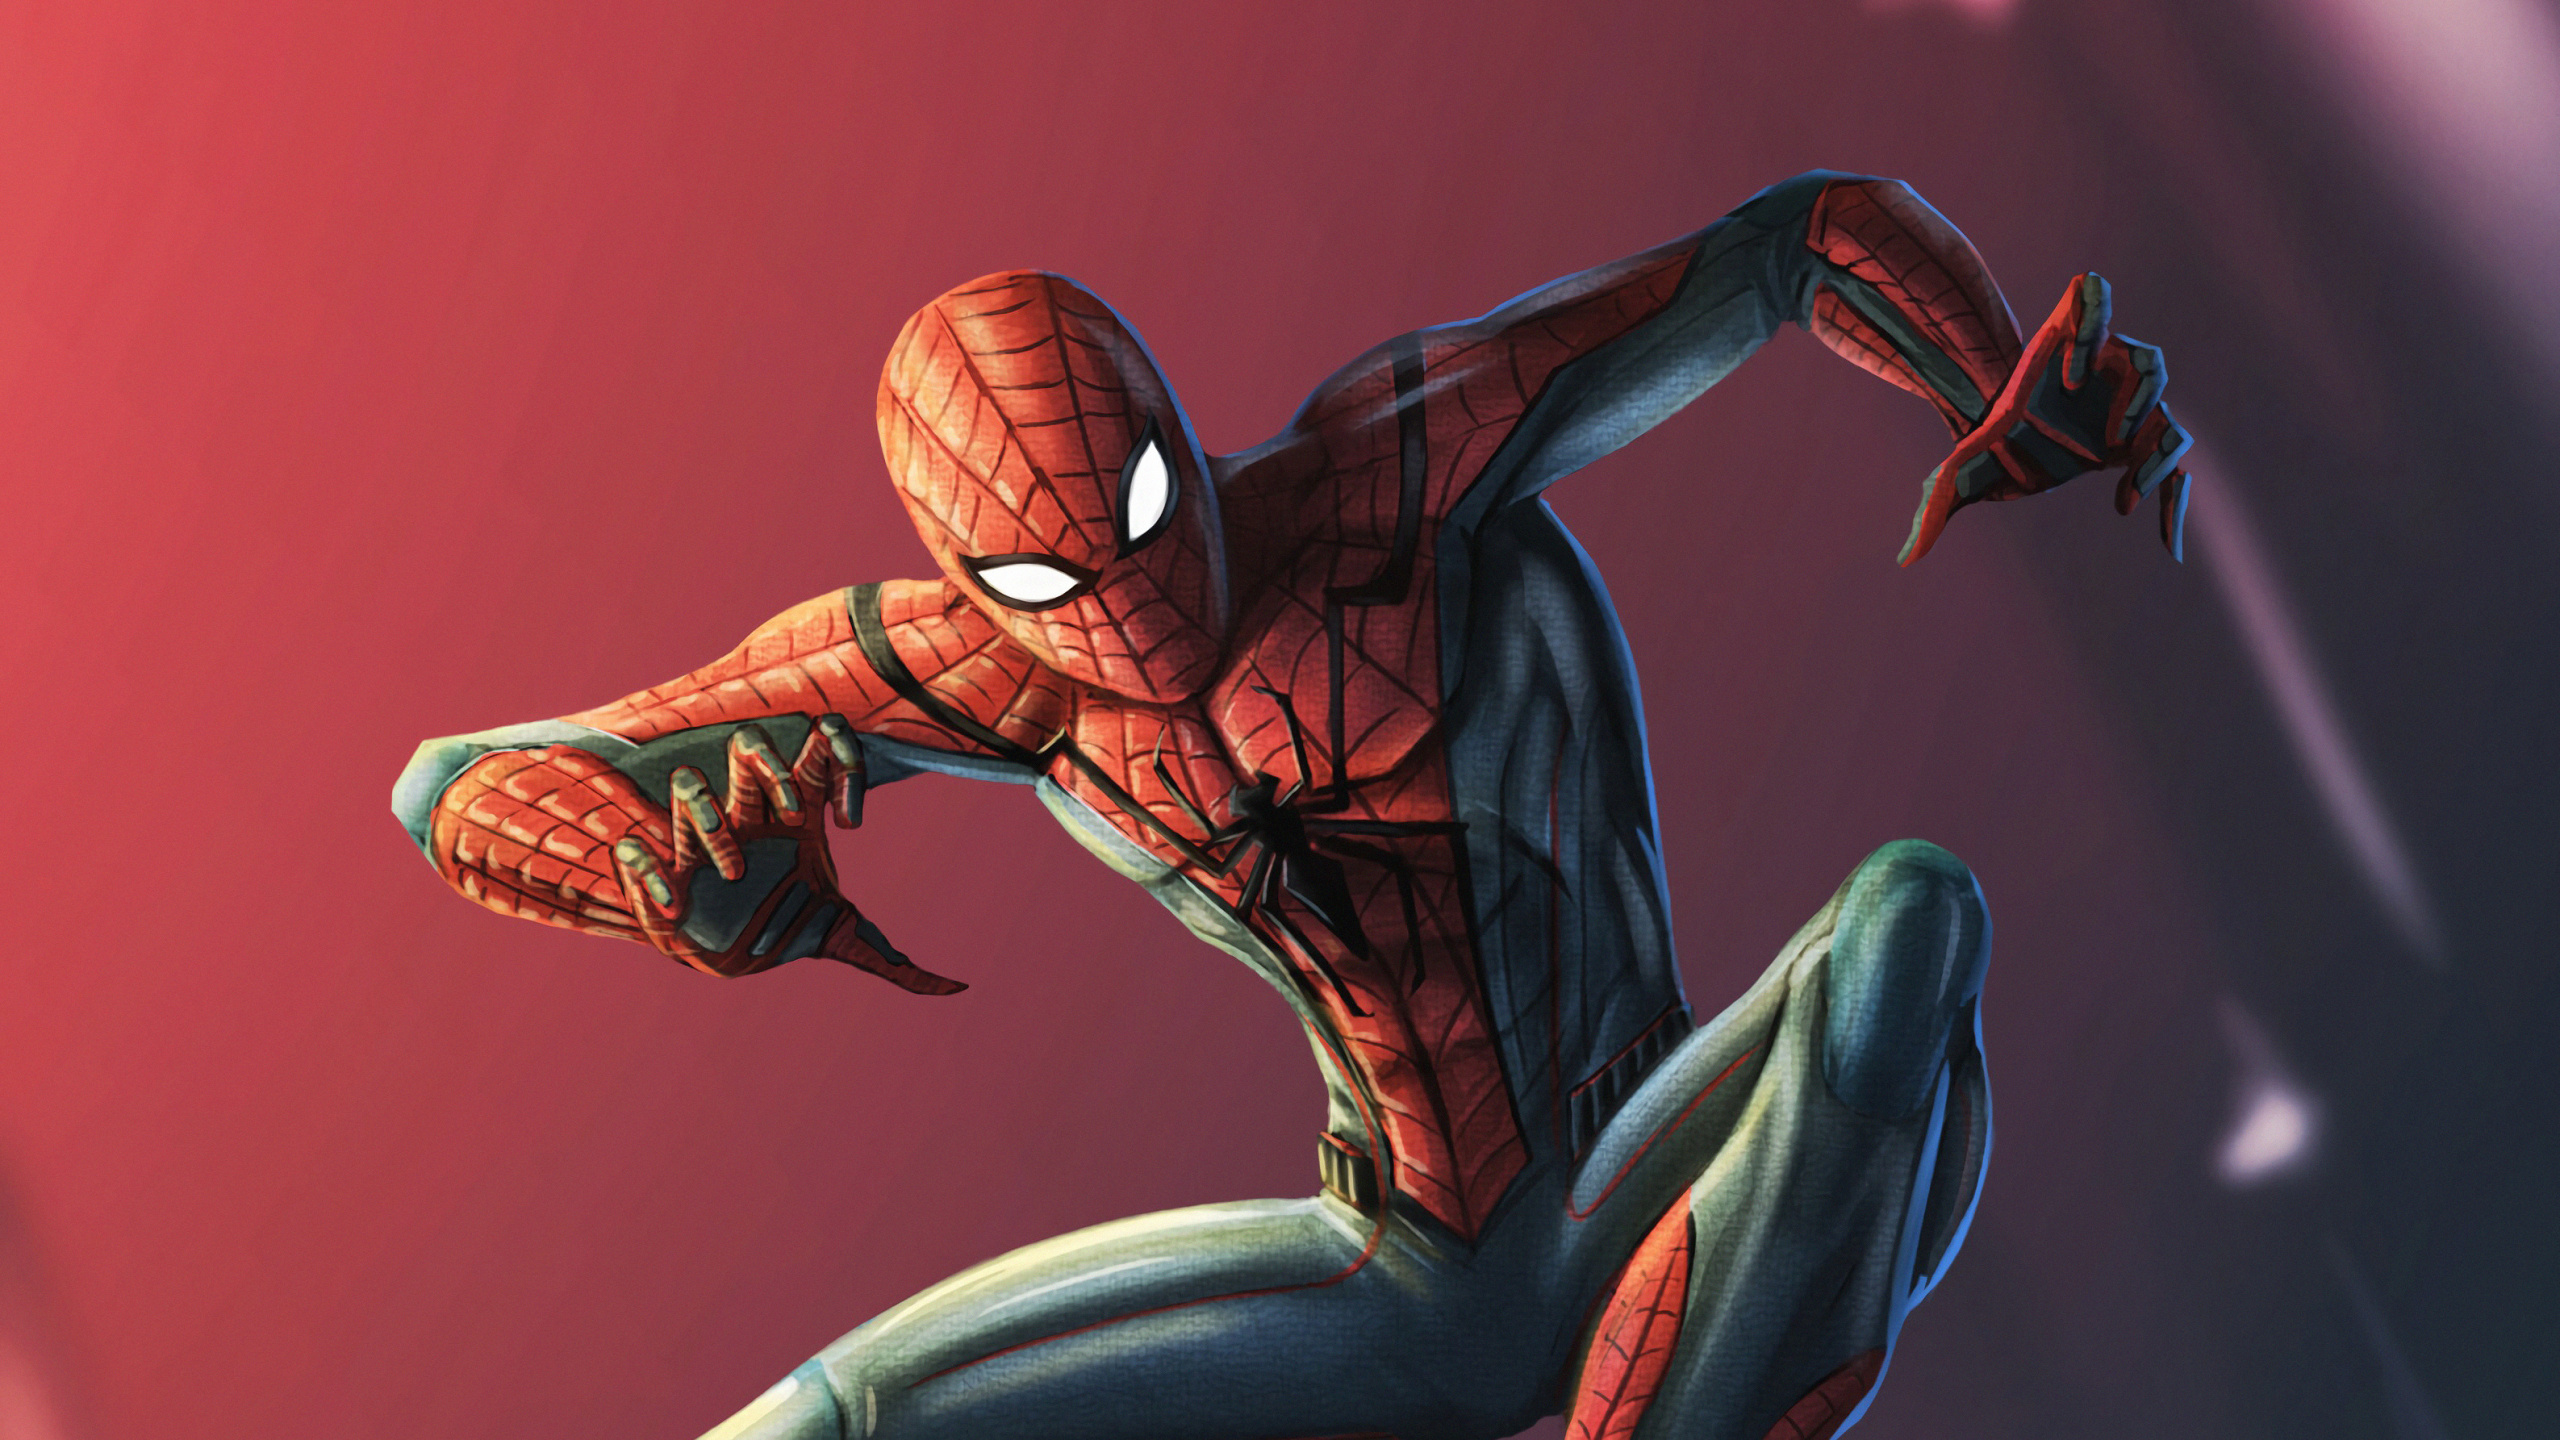 Red and Blue Spider Man Illustration. Wallpaper in 2560x1440 Resolution